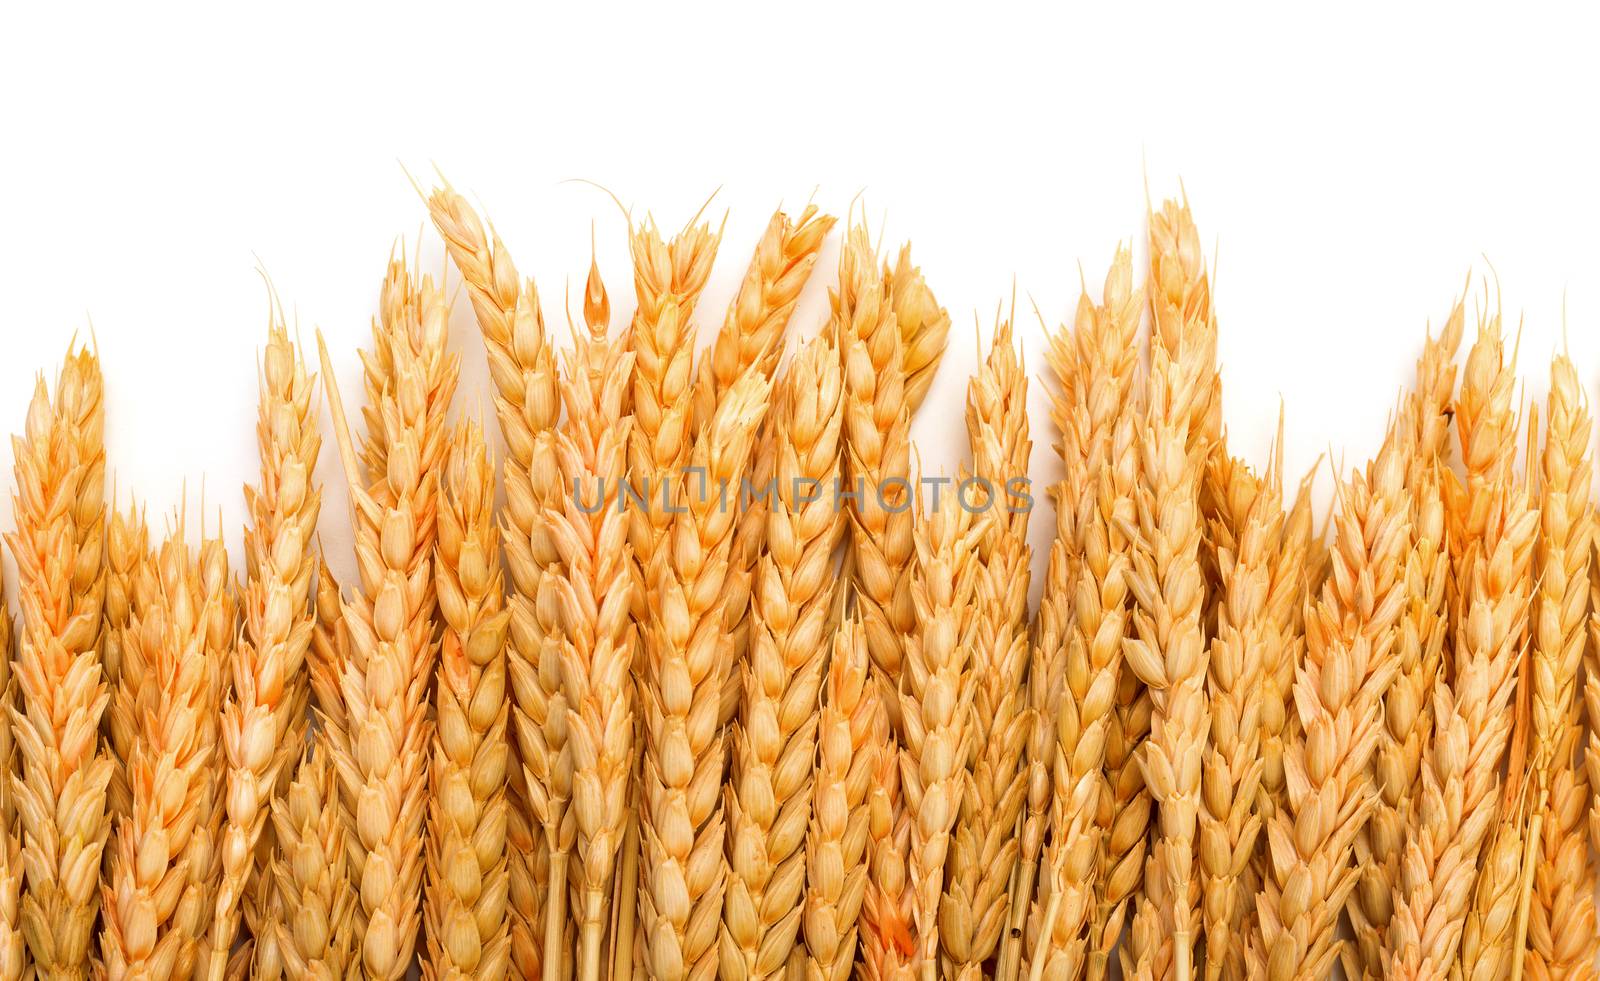 Sheaf Golden Wheat Ears by Discovod